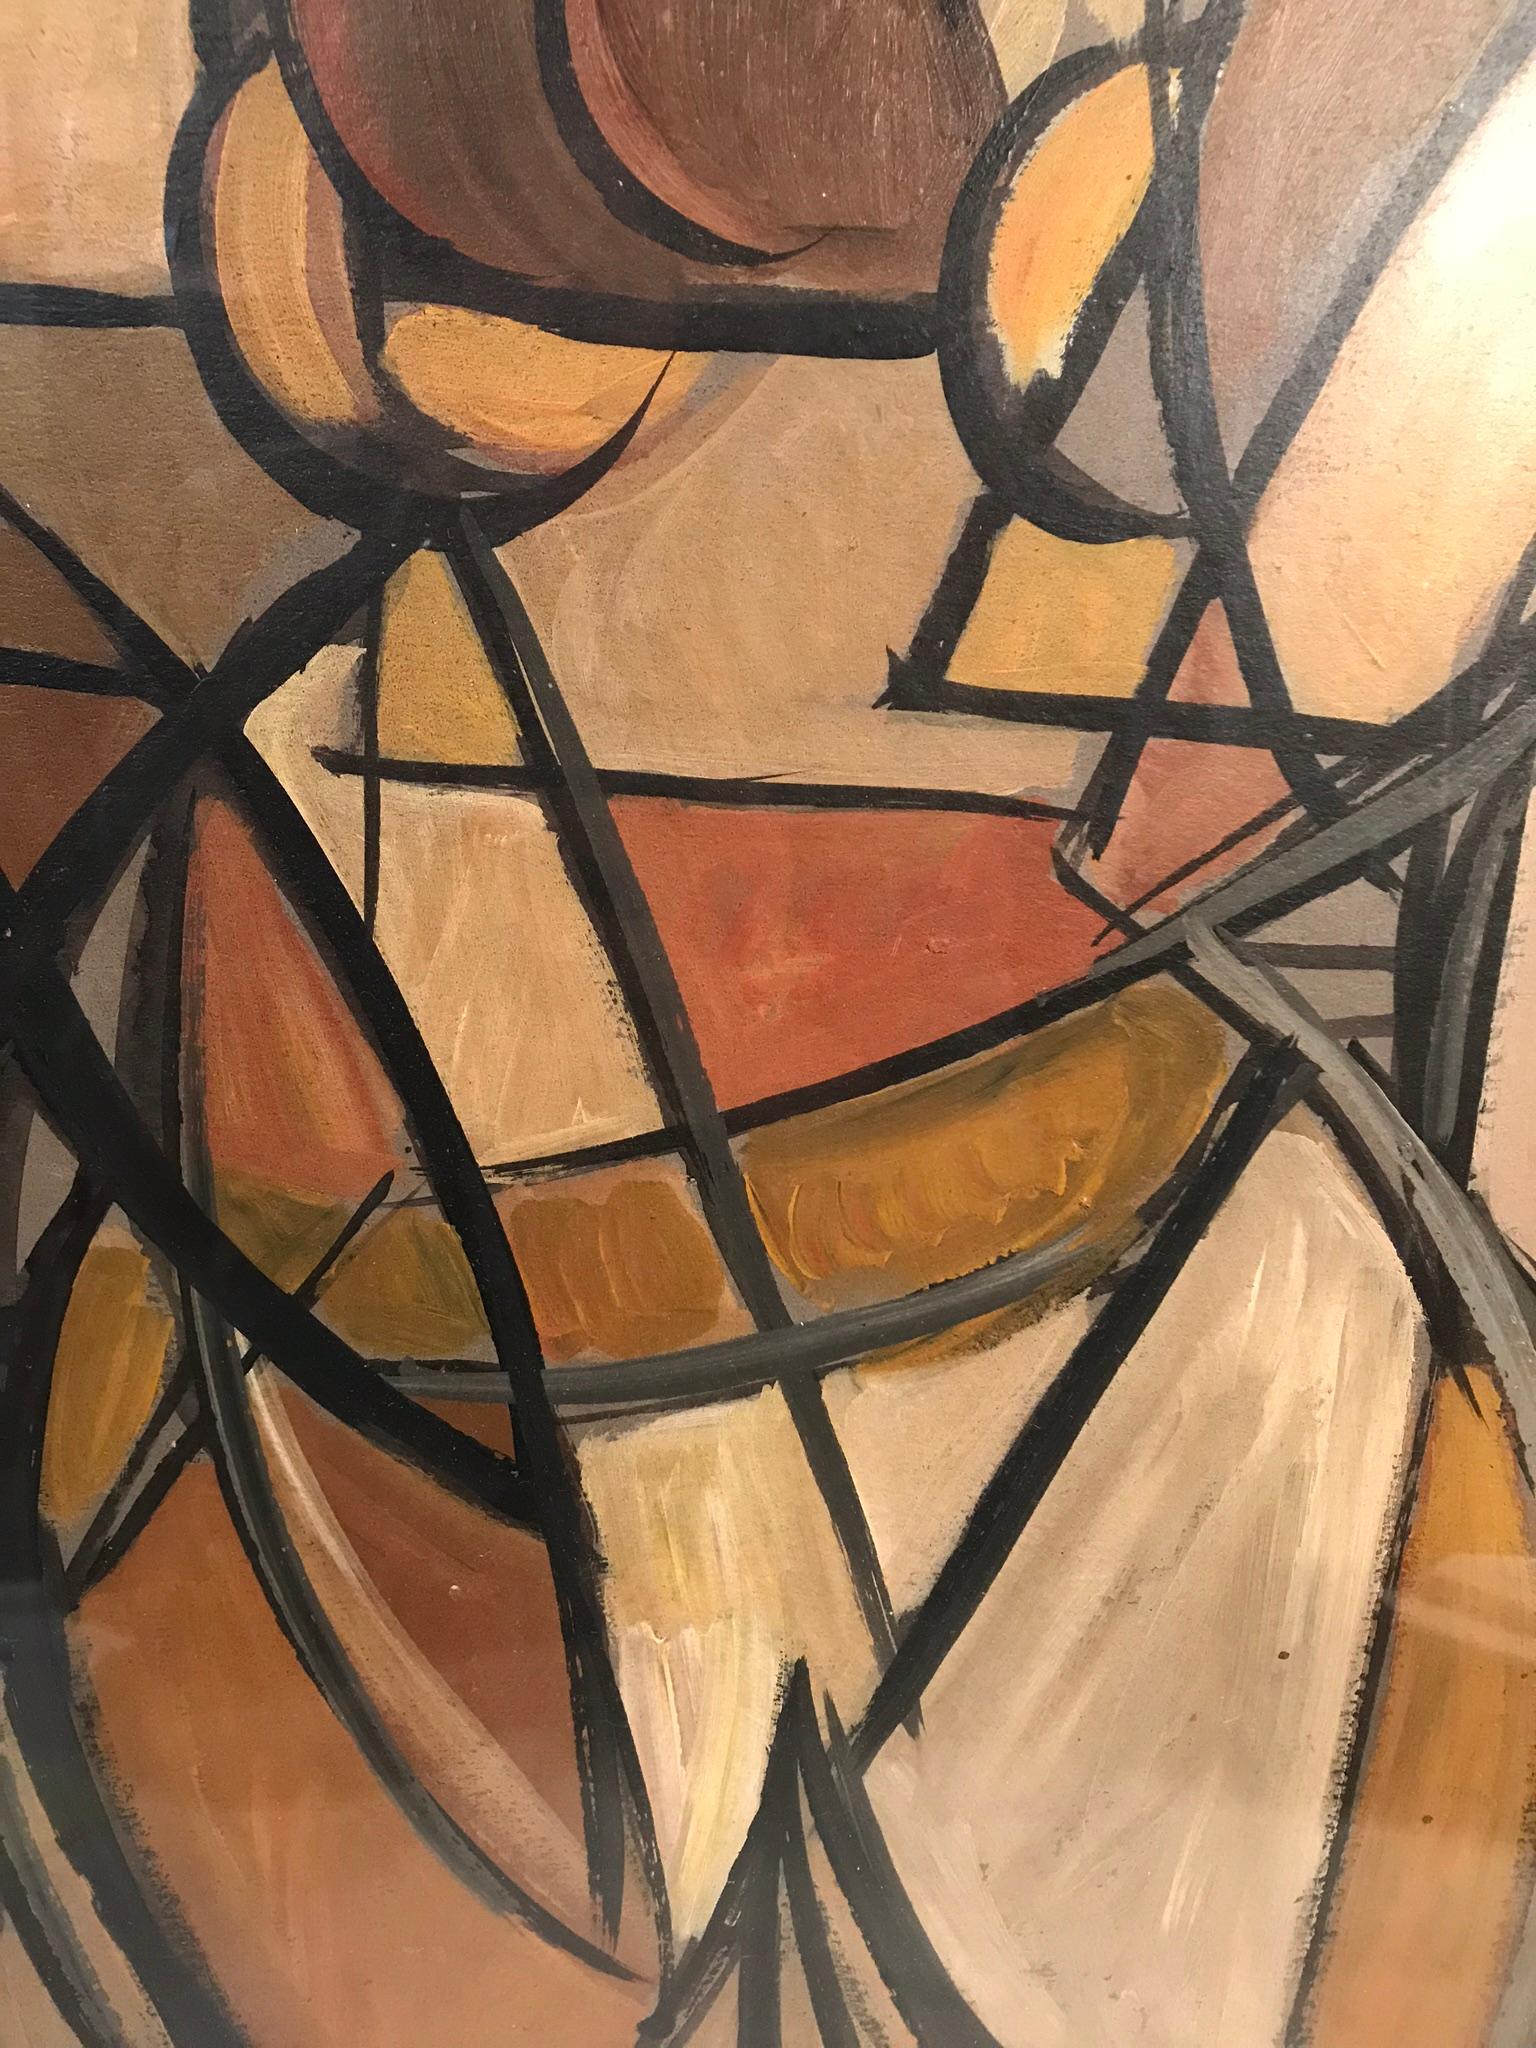 The beauty in this piece is evident. Lines flow and shapes curve as we see the artist's portrayal of the female form in this harmony of warm and neutral colors.